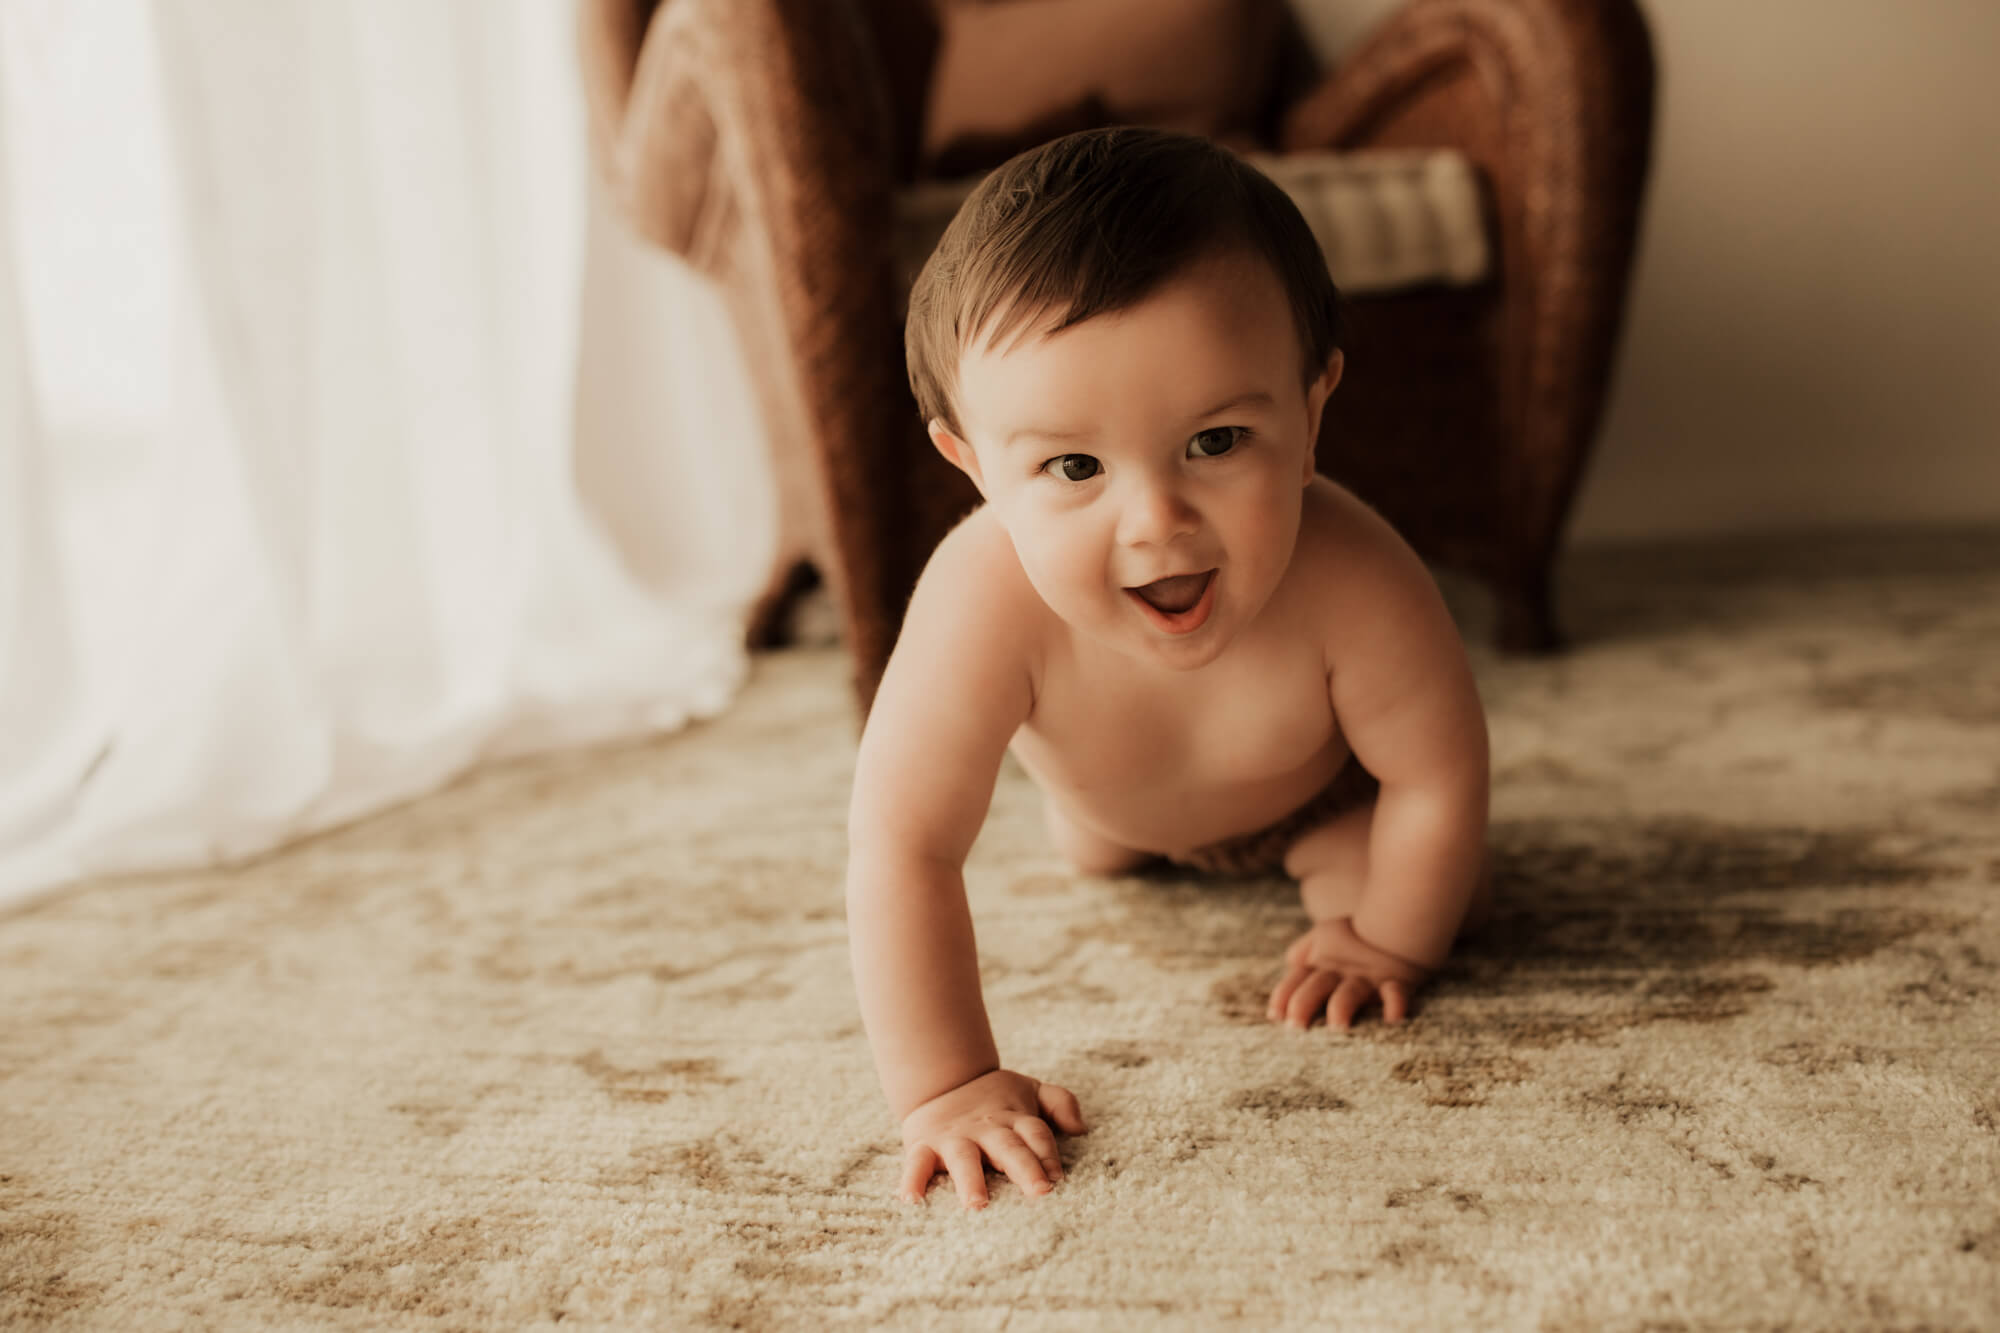 Excited boy crawls on a rug, okc family activities.